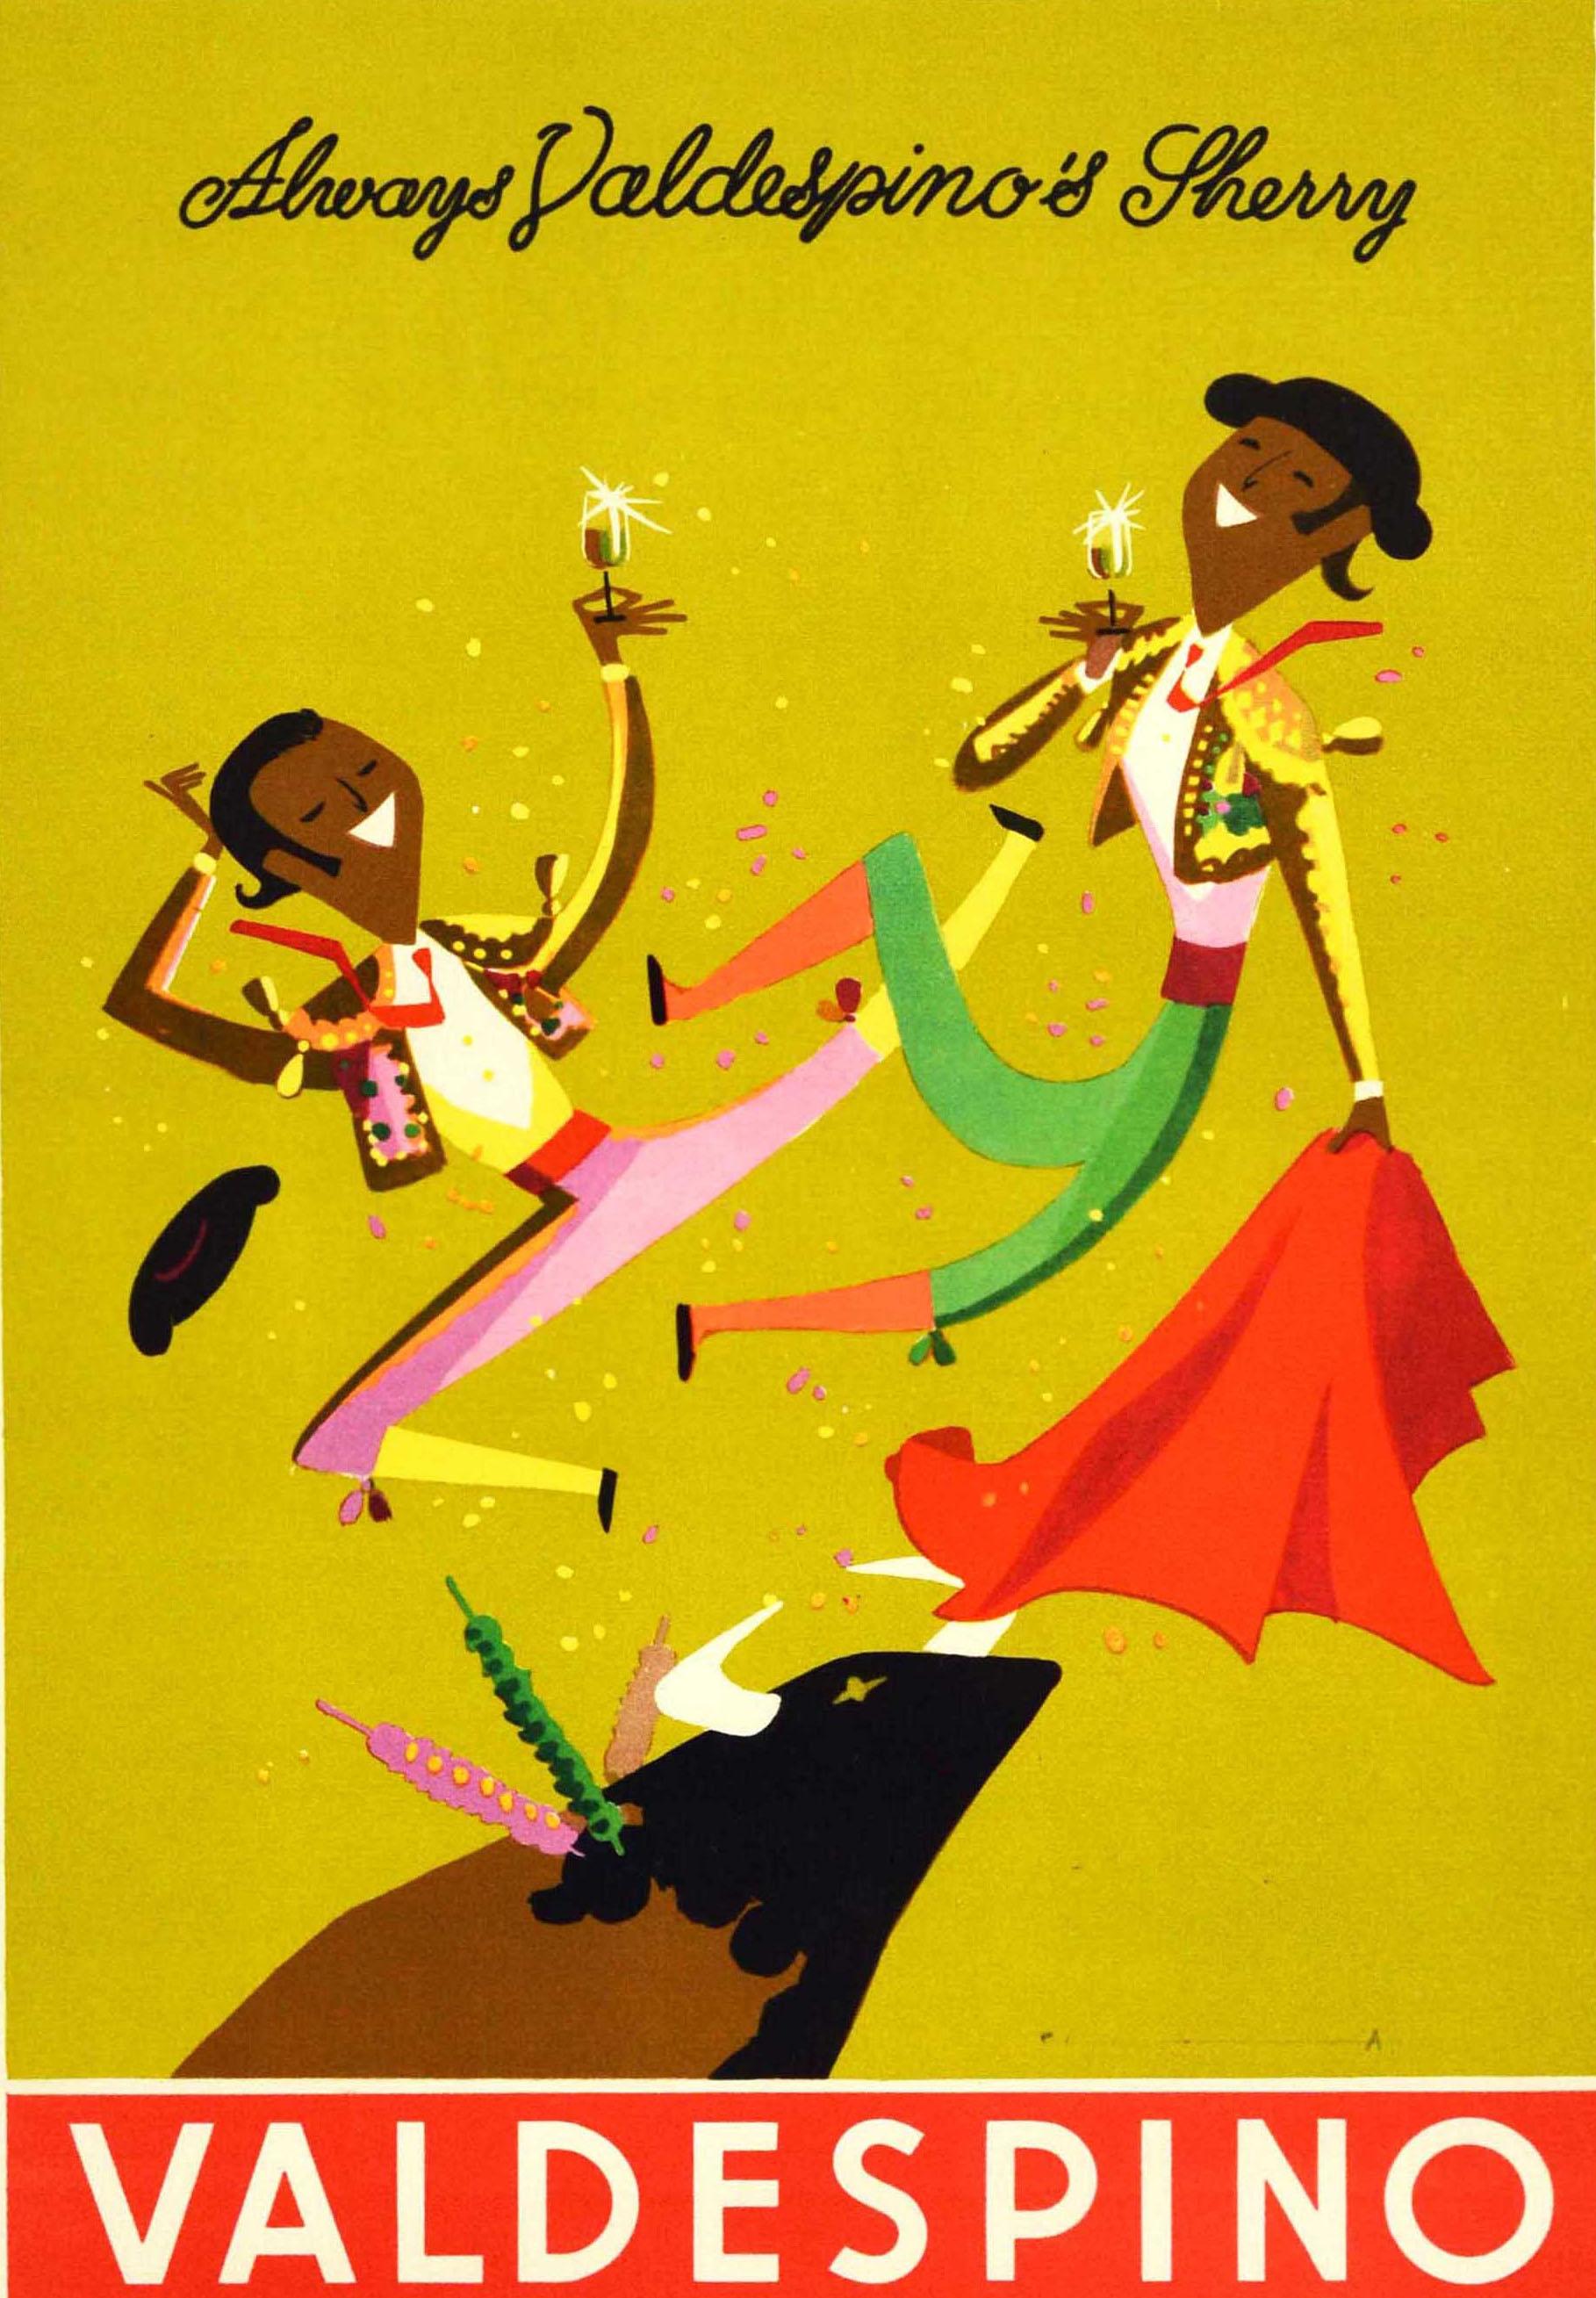 Original vintage drink advertising poster for Valdespino - Always Valdespino's Sherry - featuring a fun and colourful image of two smiling matador bullfighters holding glasses of sherry with a bull below against a festive background. Dating back to